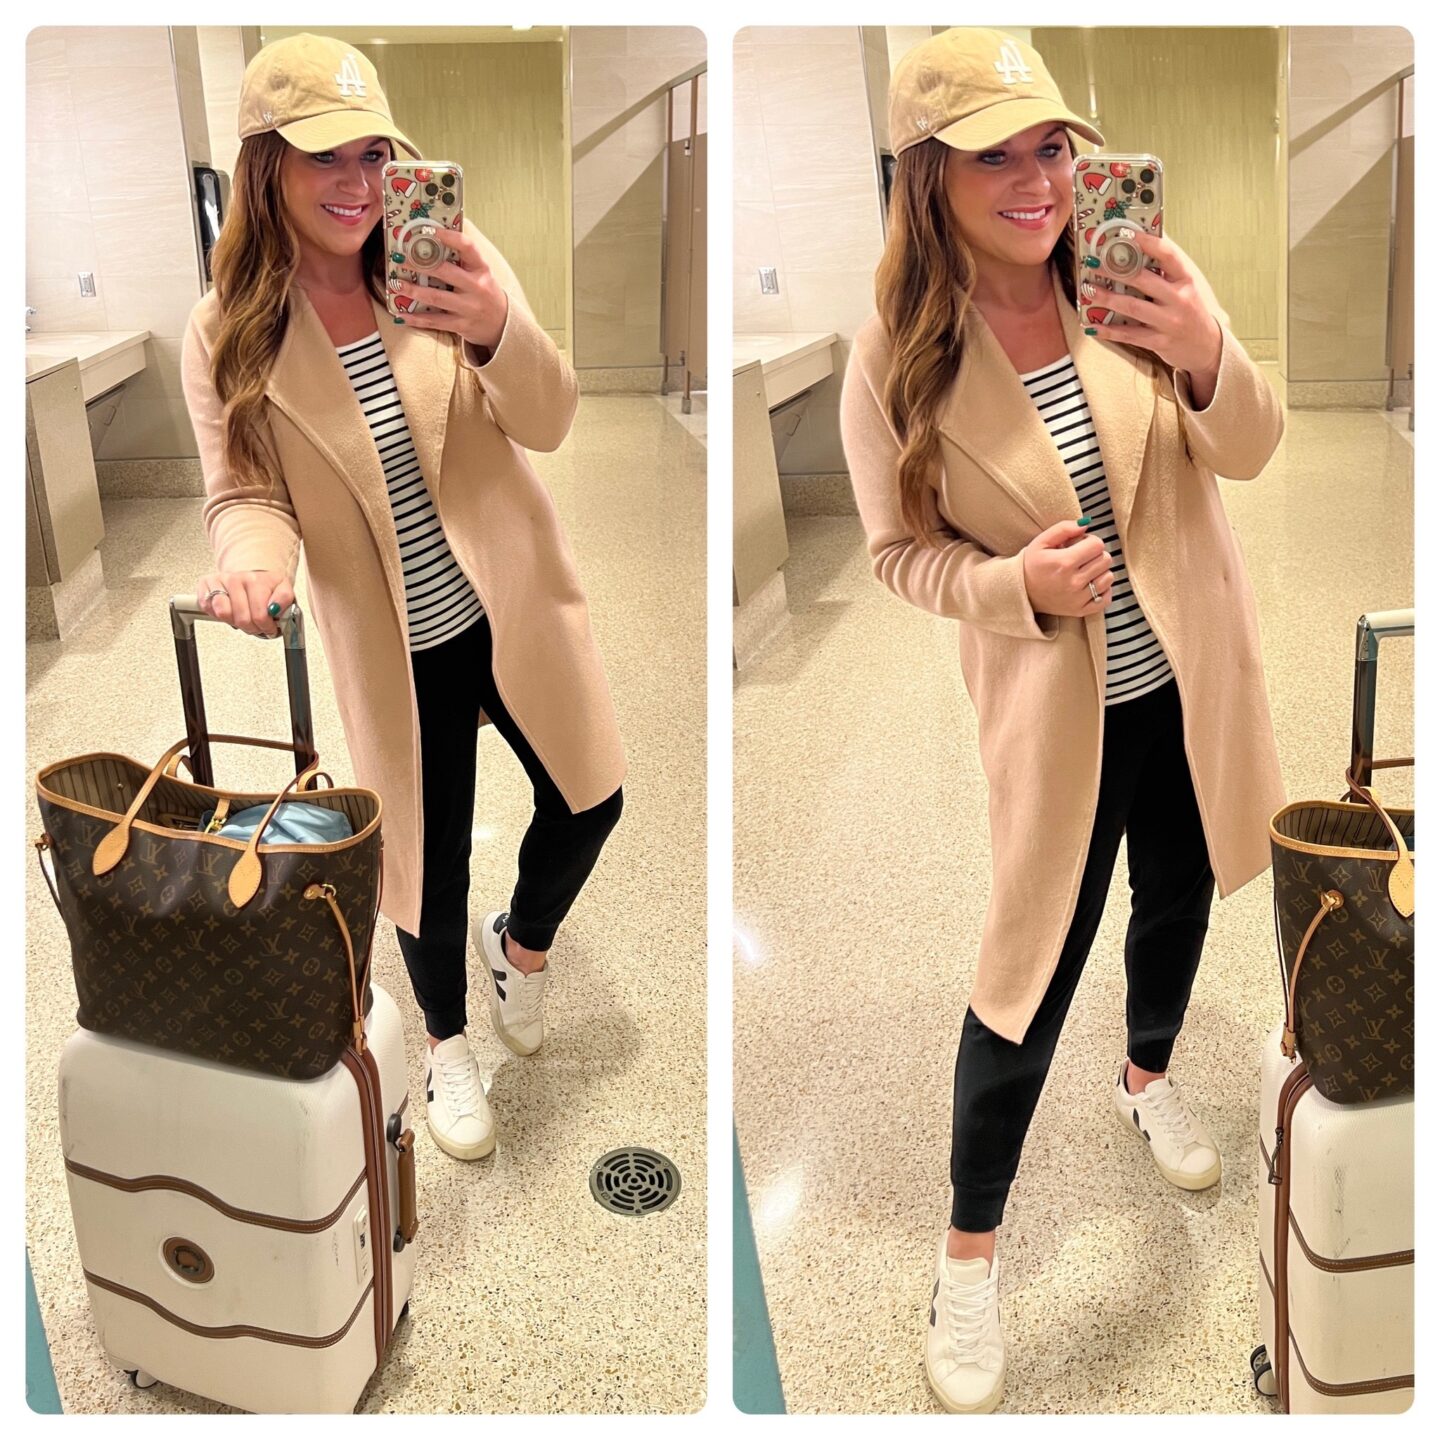 Stylish and Comfortable: Travel Outfit Ideas & Must Haves for Your Next Adventure

travel, travel outfit, vacation, vacation outfit, casual outfit, summer vacation, spring vacation, purse, luggage, suitcase carry-on bag